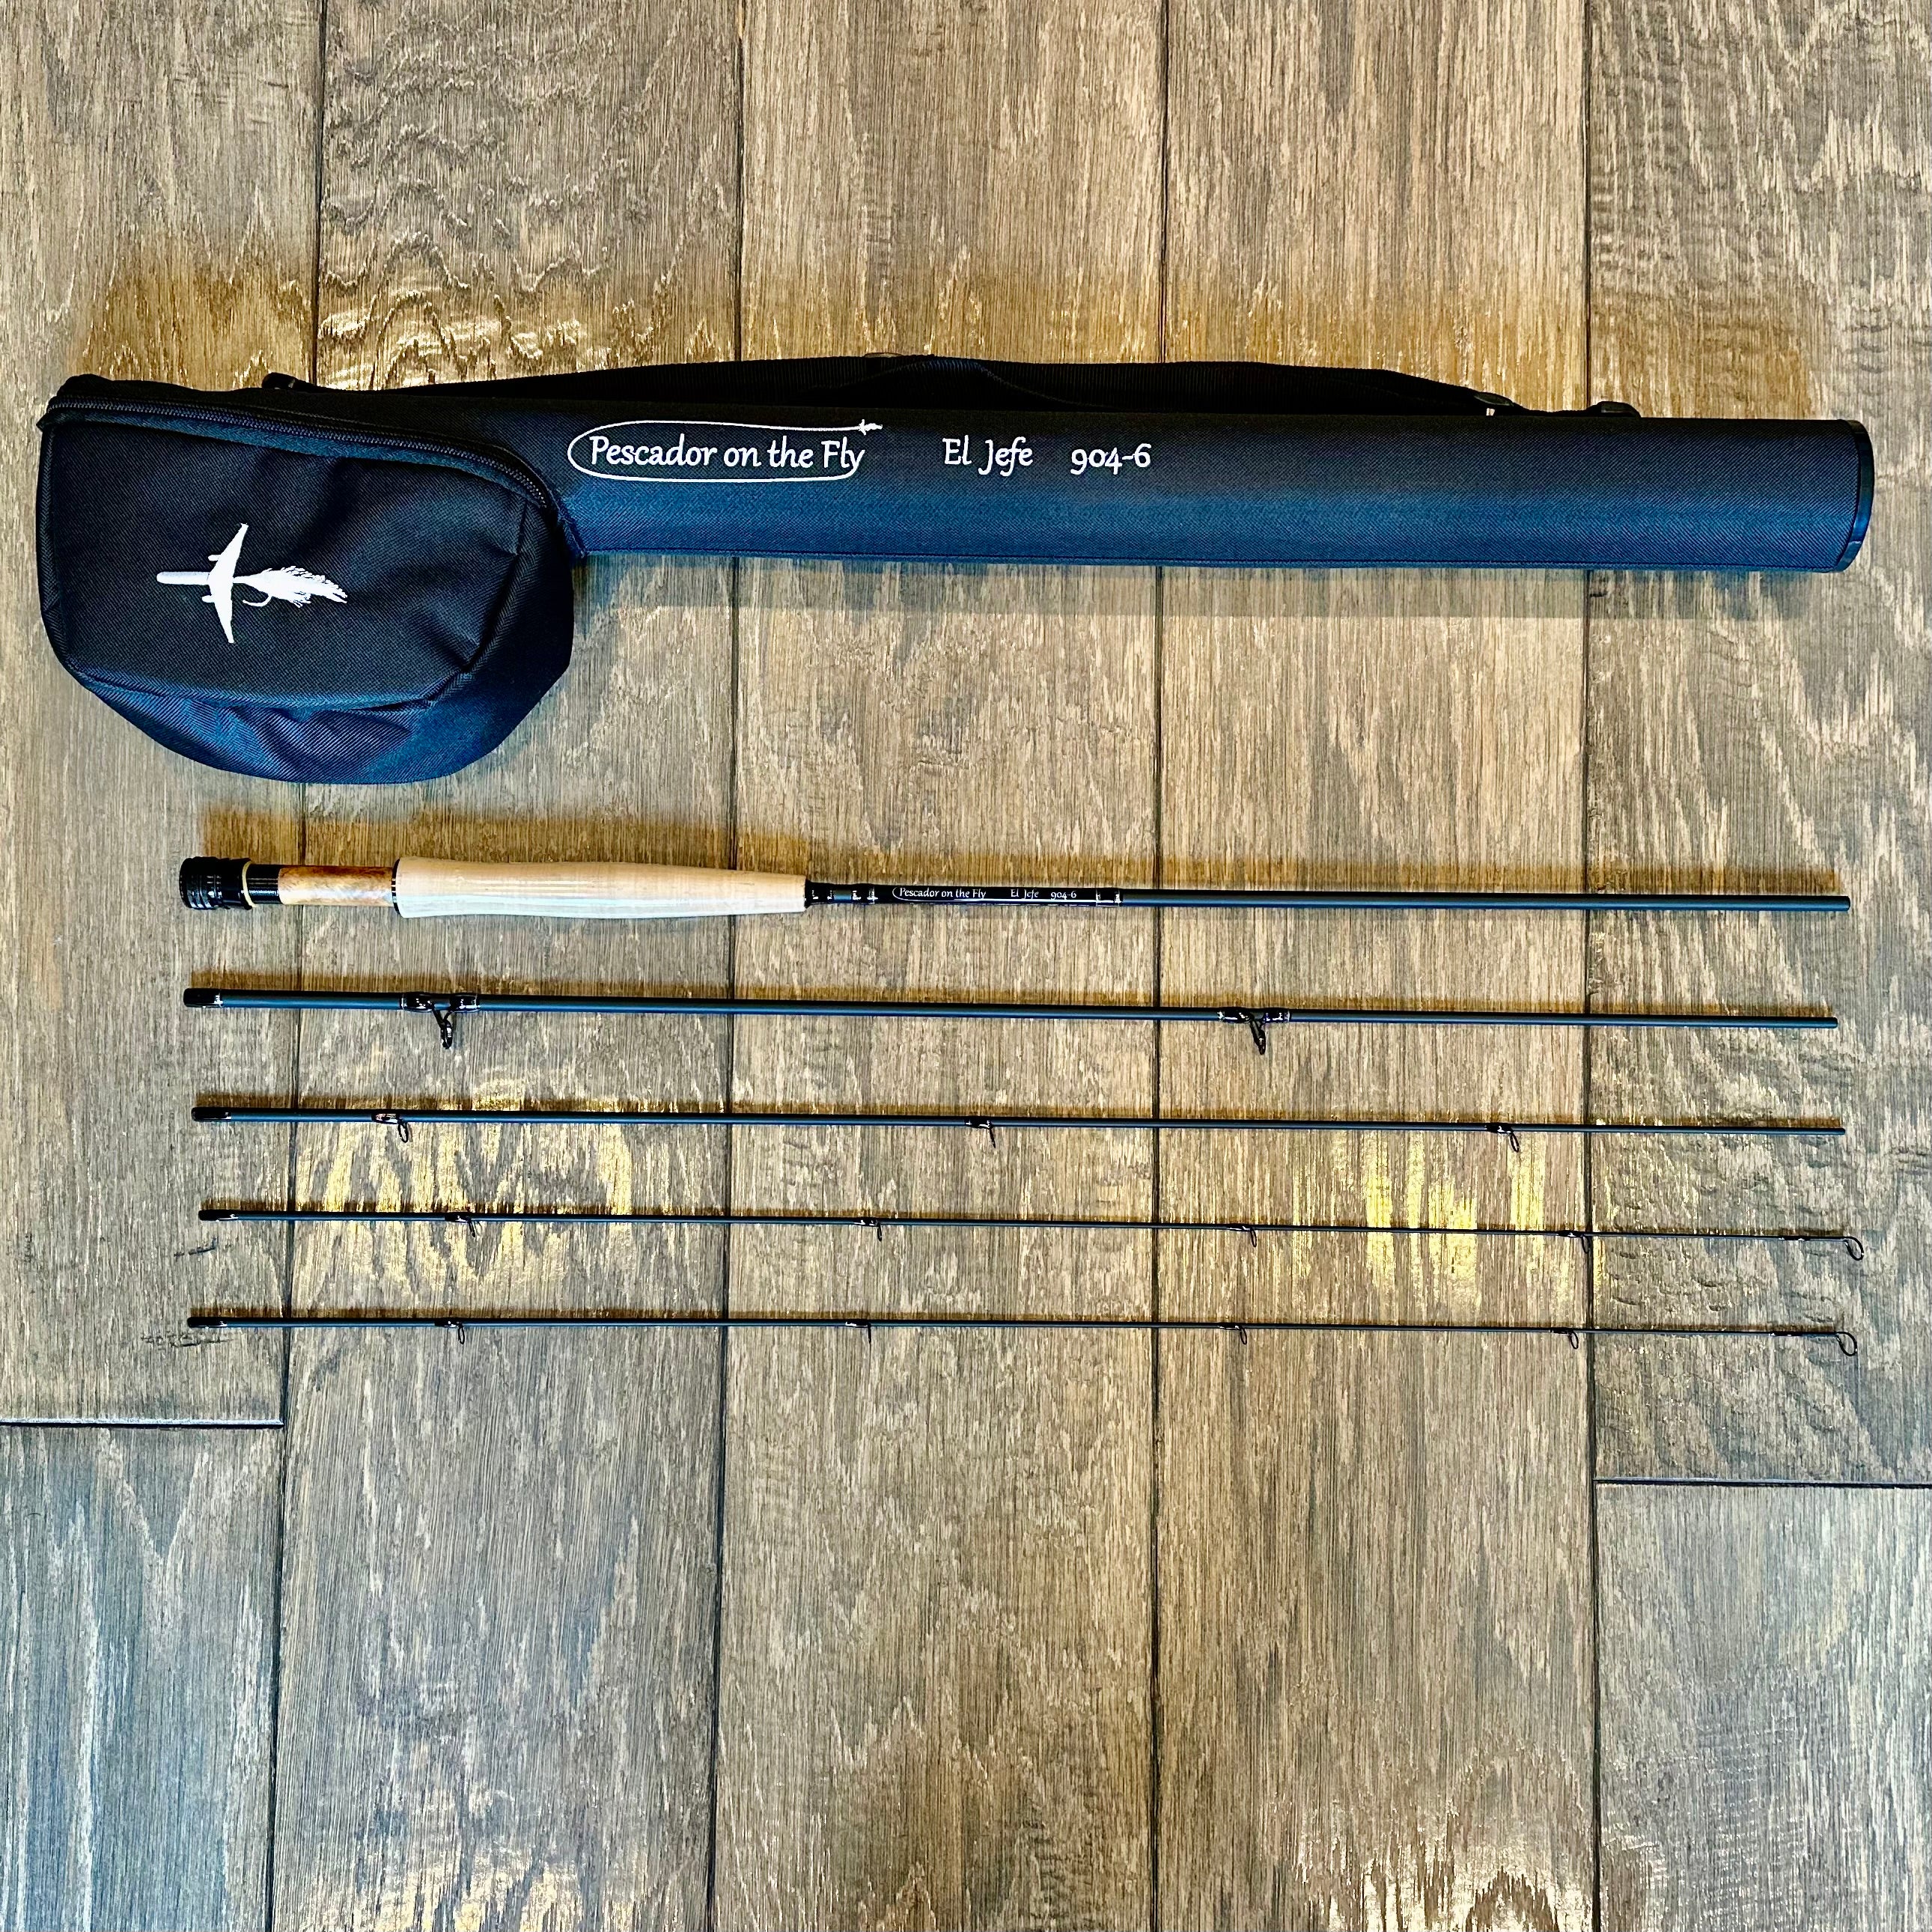 EL JEFE FLY FISHING RODS | 904-6 | 9 Foot 4 Section 6 Weight Fly Rod